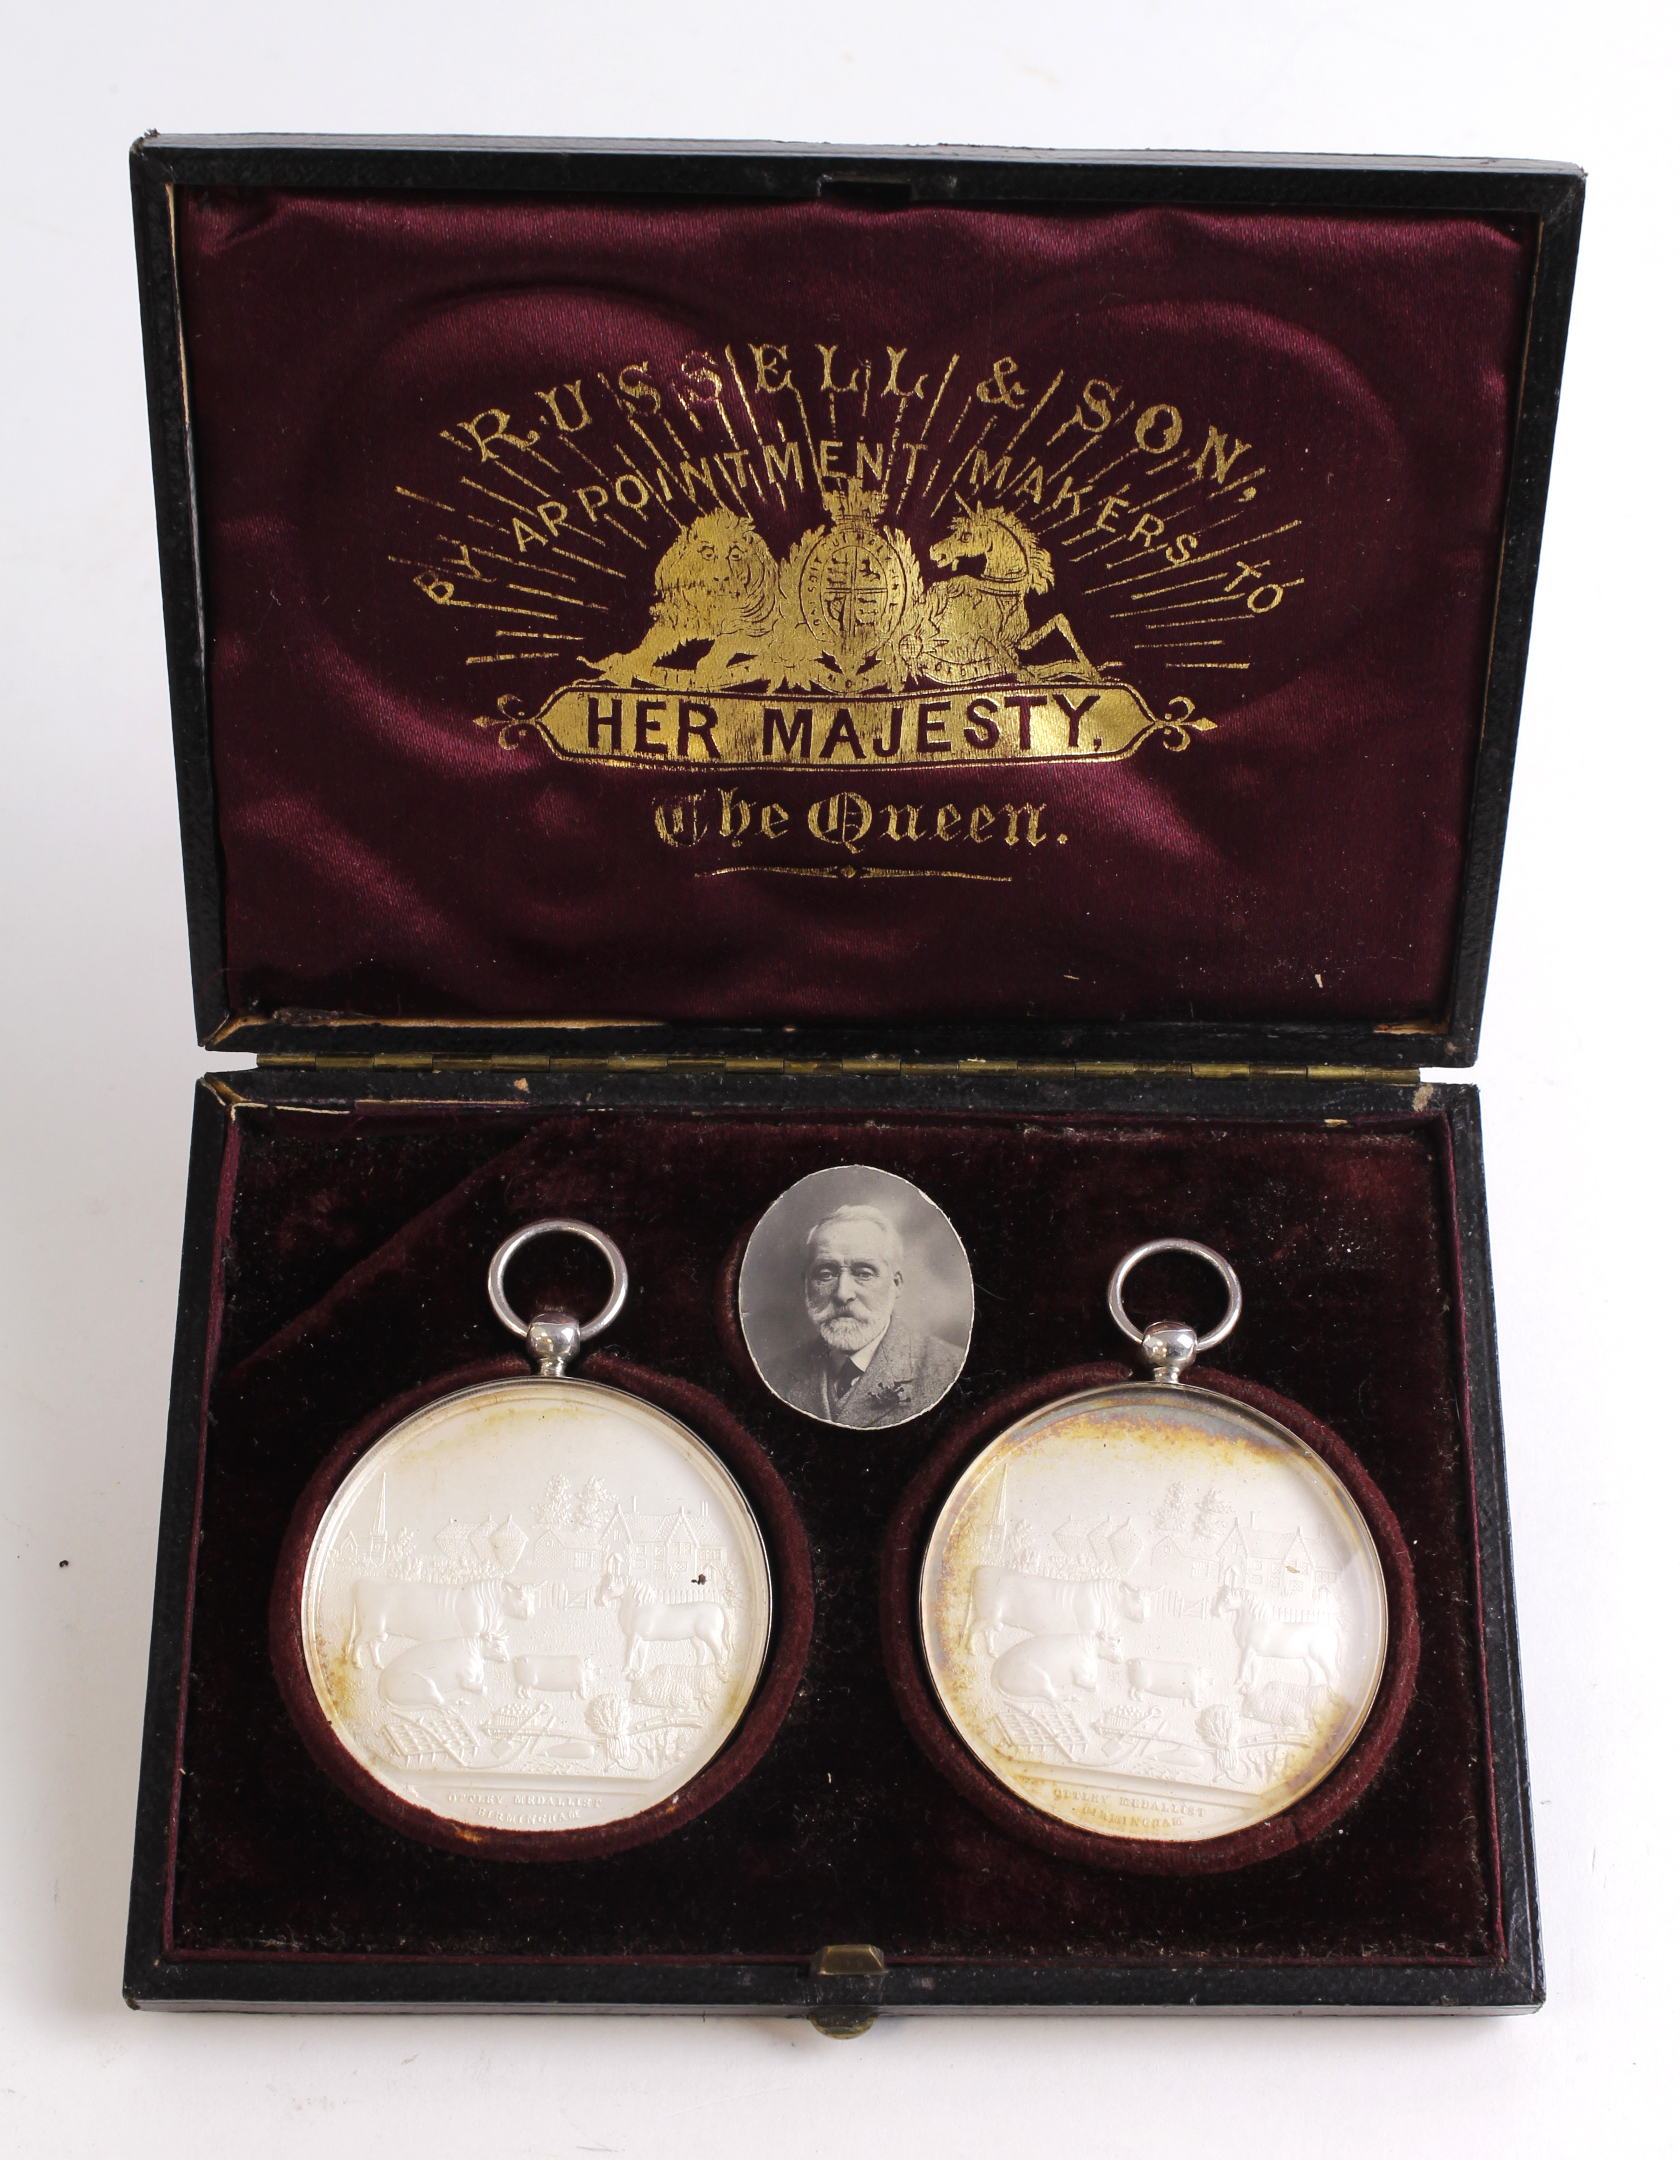 Glazed silver Agricultural medals x 2 in a lovely Russell & Son, Victorian Presentation Box; the box